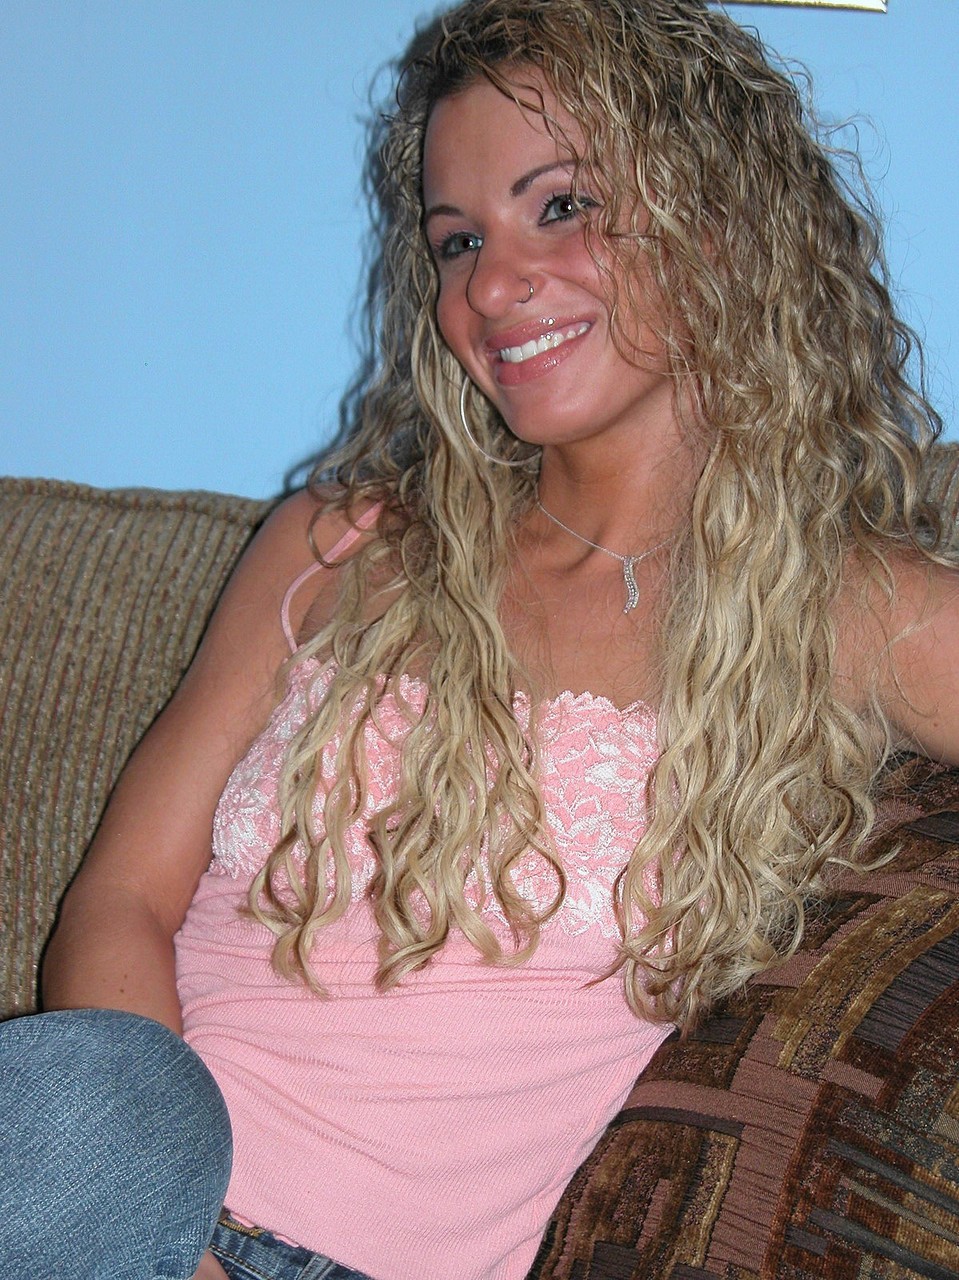 Slender Curly Haired Milf Holly Toys Her Tight Love Hole Up Close On The Sofa